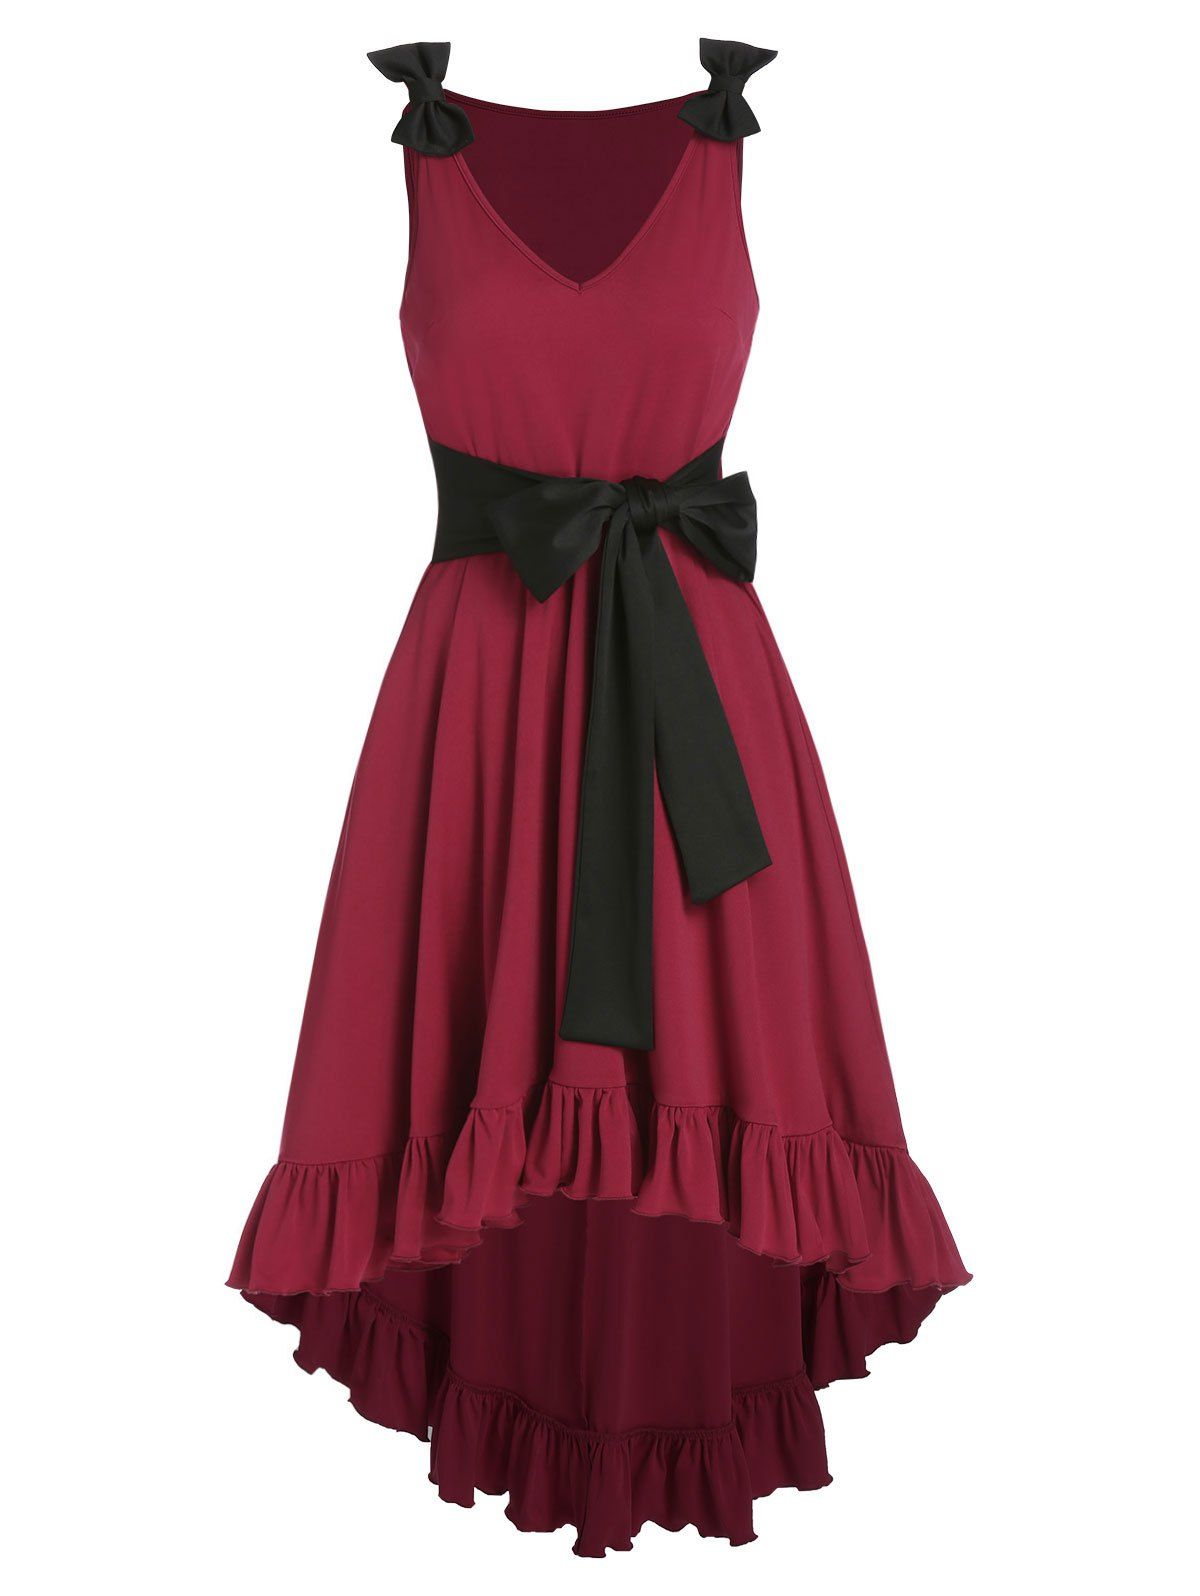 Ruffles Bowknot  Bicolor High Low Dress - RED WINE 3XL